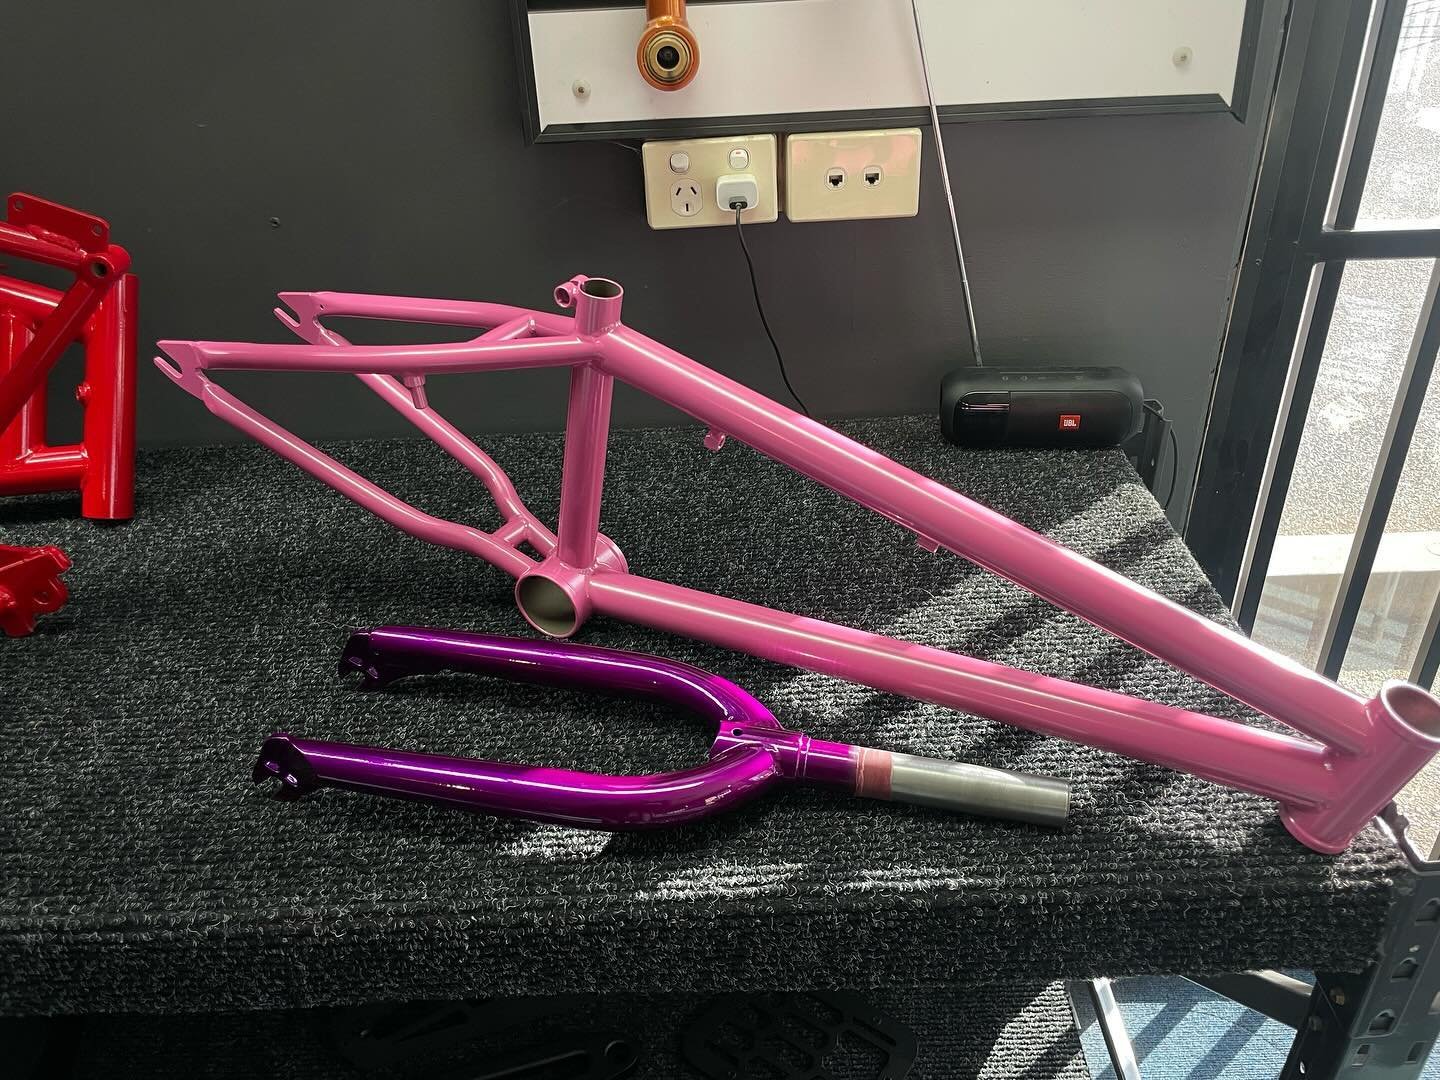 Frame and forks coated in Laser Pink and Illusion Violet 😎
#epicpowdercoating #needpowdercoating #powdercoatingporn #powdercoatinglife #powdercoatingnation #powdercoatingwork #qualitypowdercoating #precisionpowdercoating #showoffpowdercoating #extre